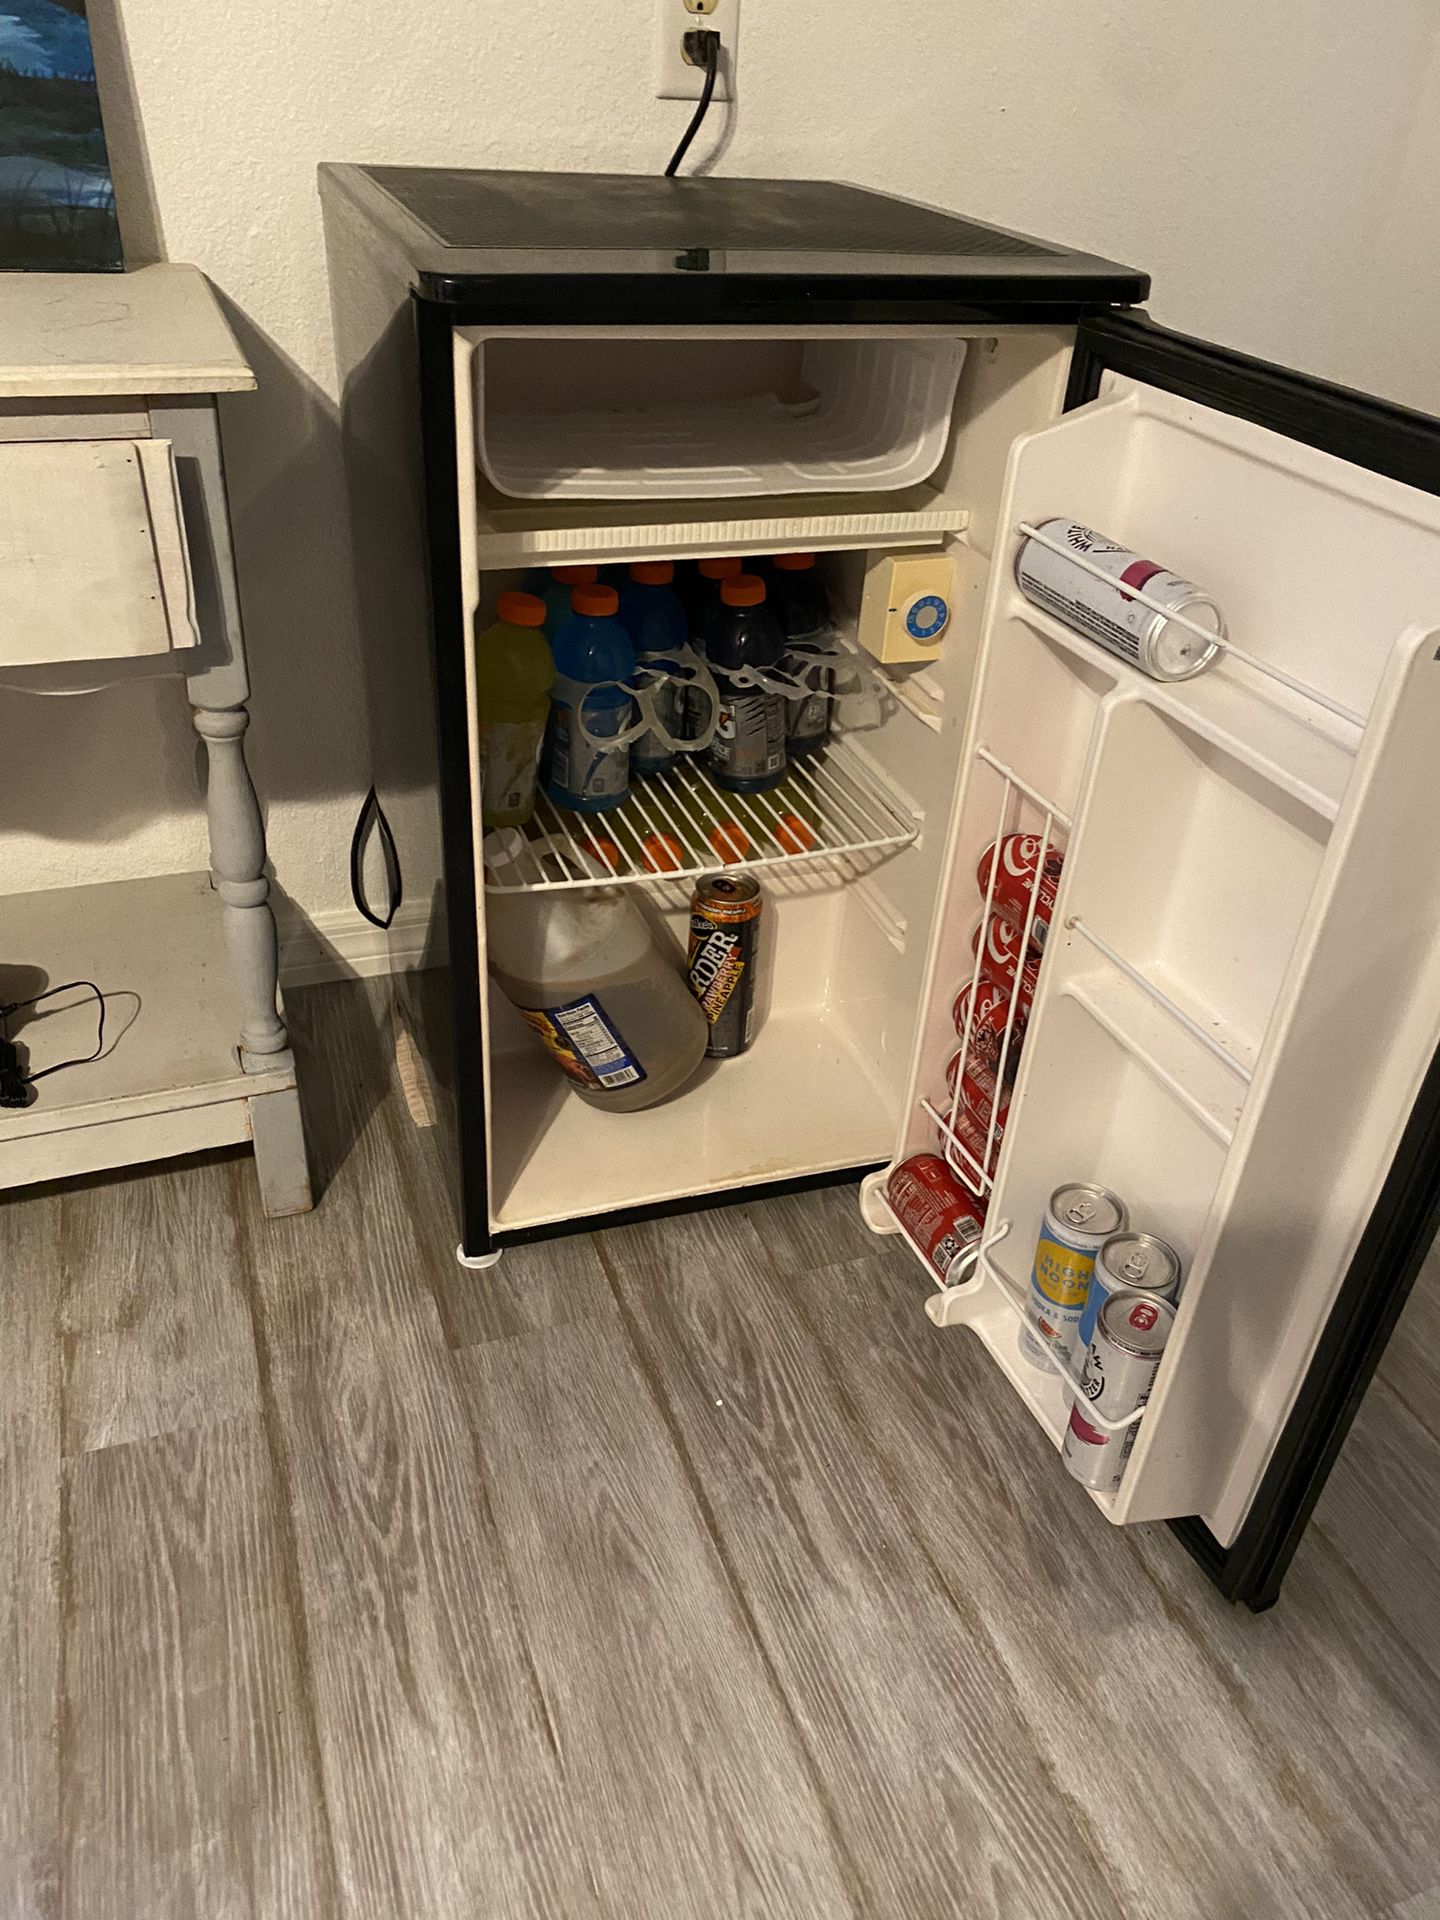 Mini Fridge Works Great Just Fit My Big One In Cheap